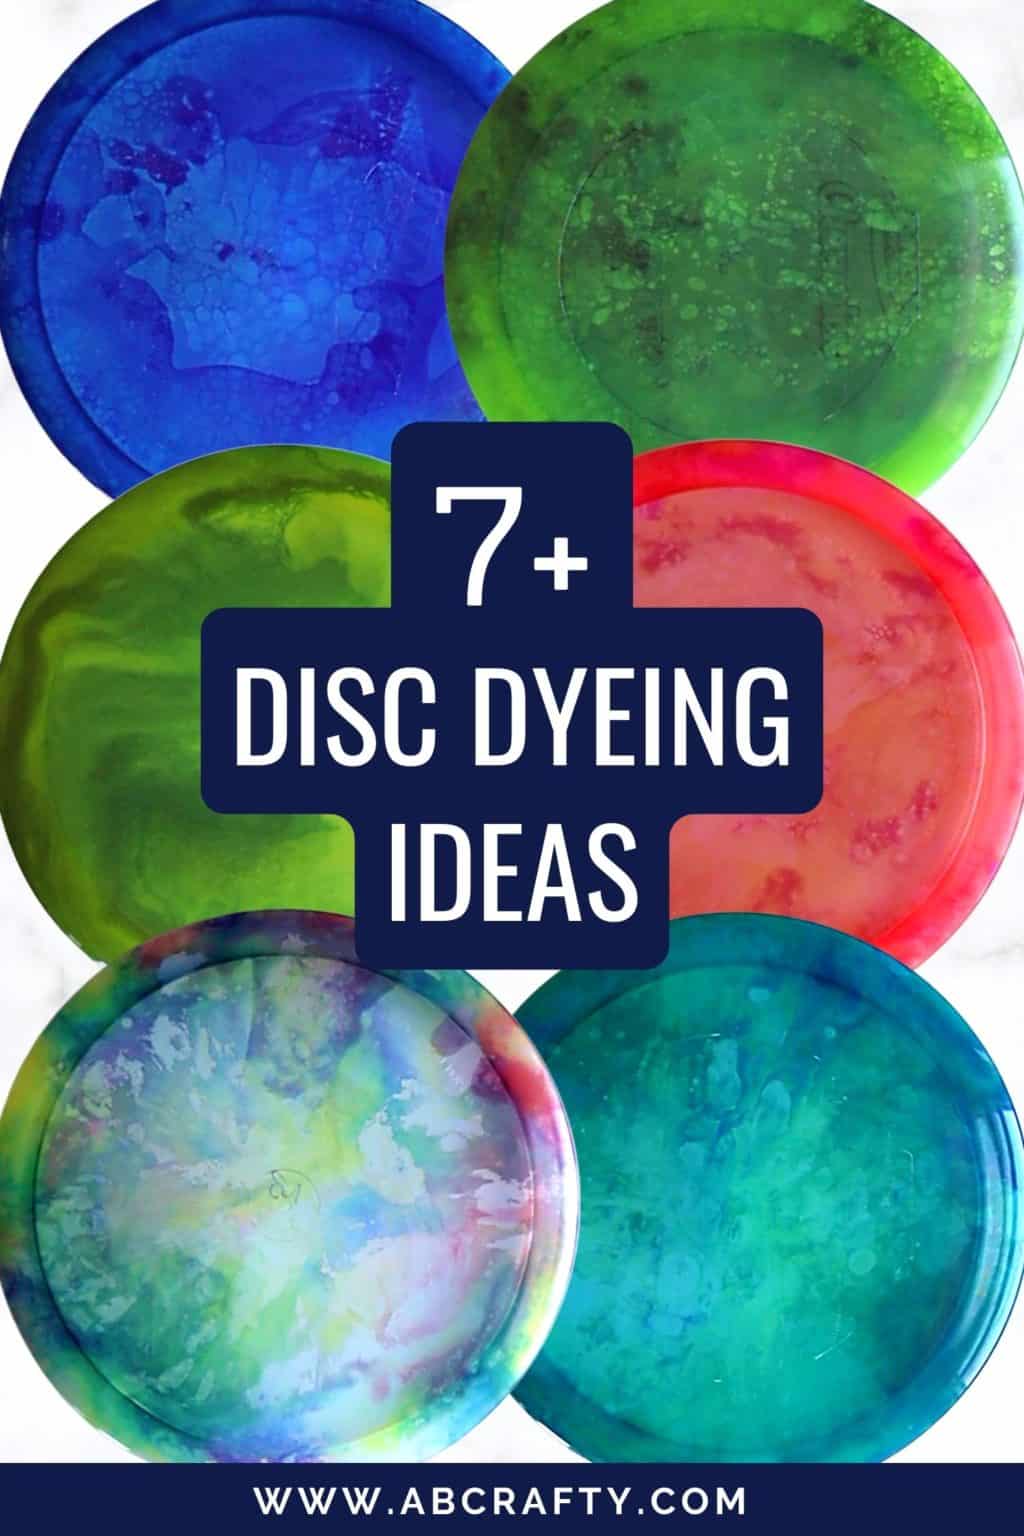 6 dyed disc golf discs in different colors with the title "7+ disc dyeing ideas, www.abcrafty.com"